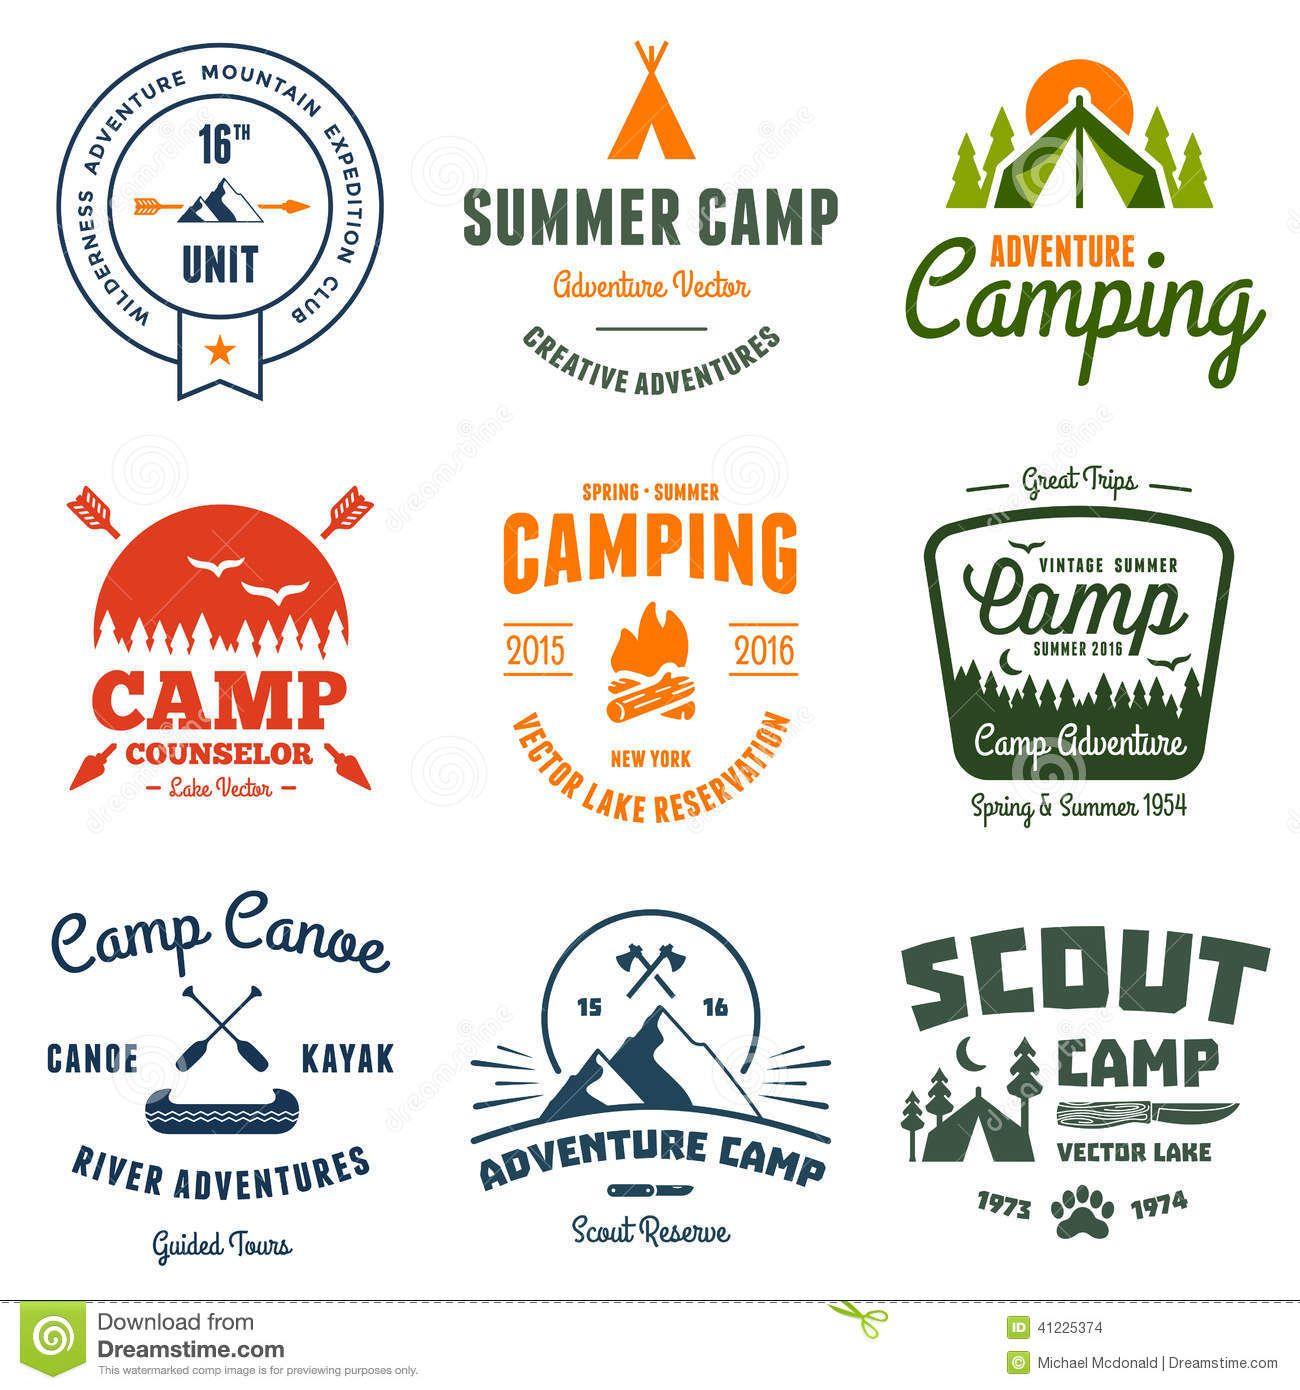 Camp Logo - Vintage Camp Graphics - Download From Over 39 Million High Quality ...